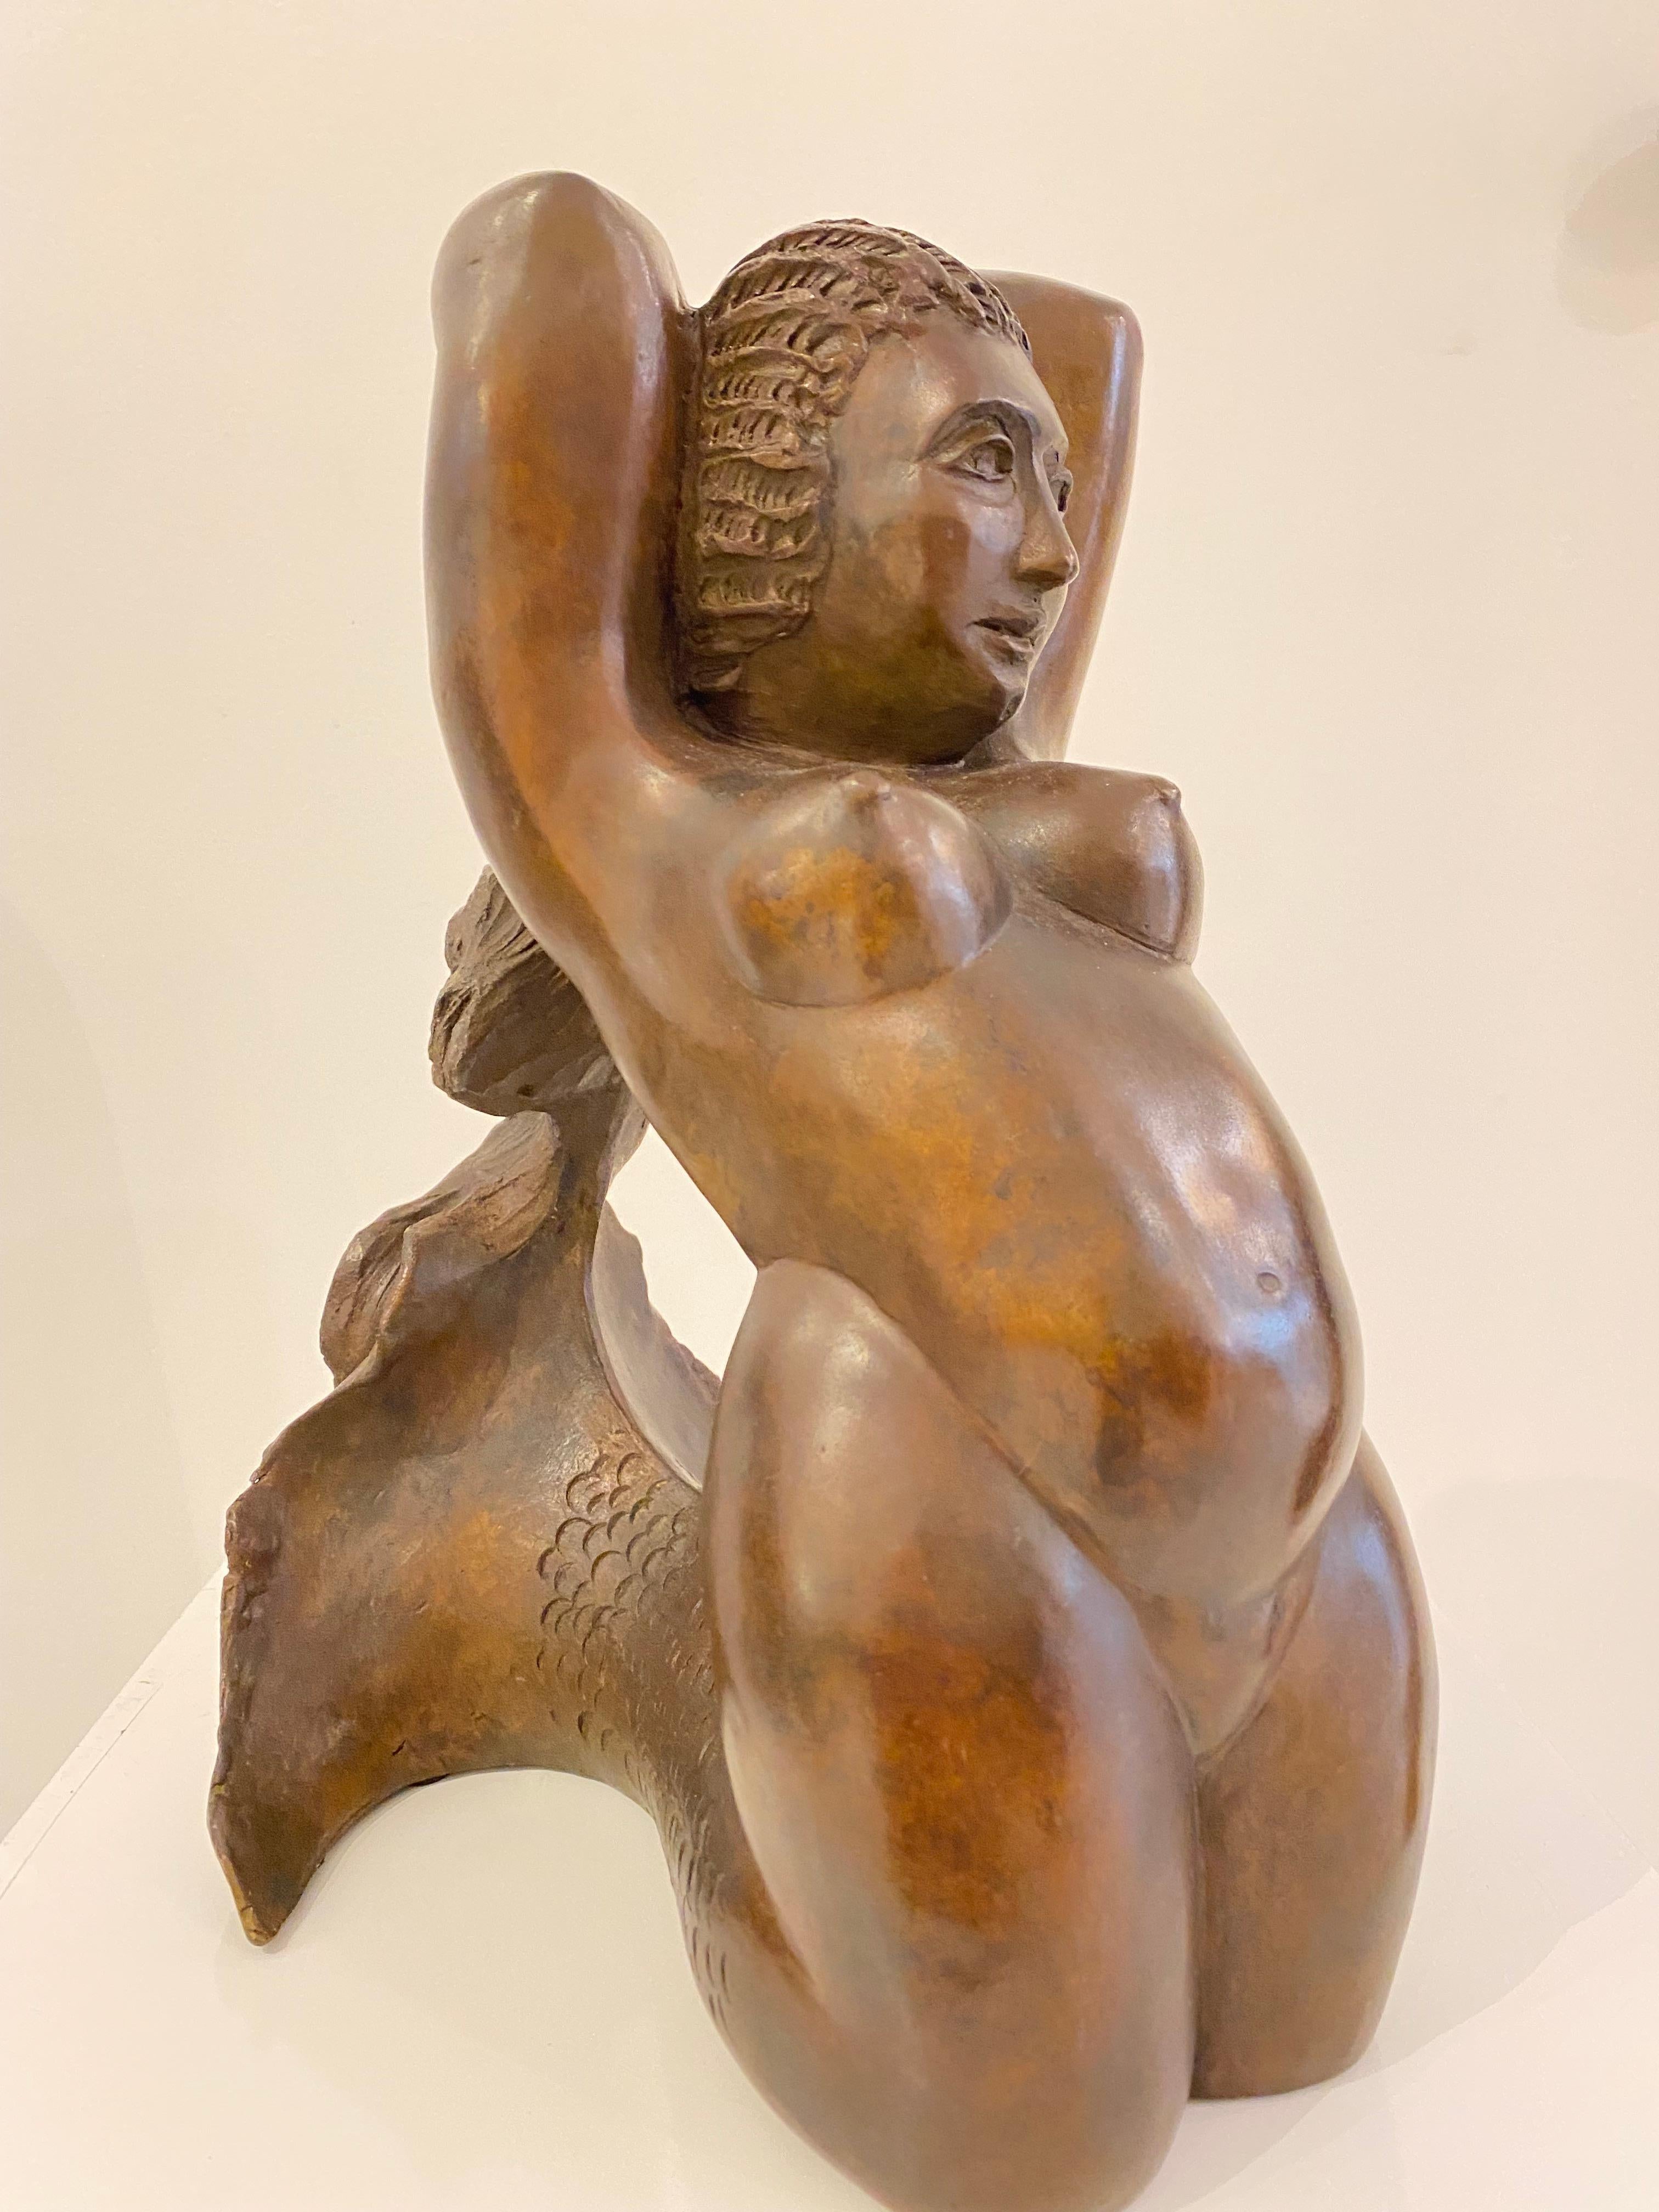 This is a beautifully patinated bronze mermaid sculpture by Barbara Beretich. The mermaid is kneeling with her arms up. Her hair seamlessly blends into her beautiful fin. the sculpture has a beautiful liver bronze finish. The fin is exquisite and